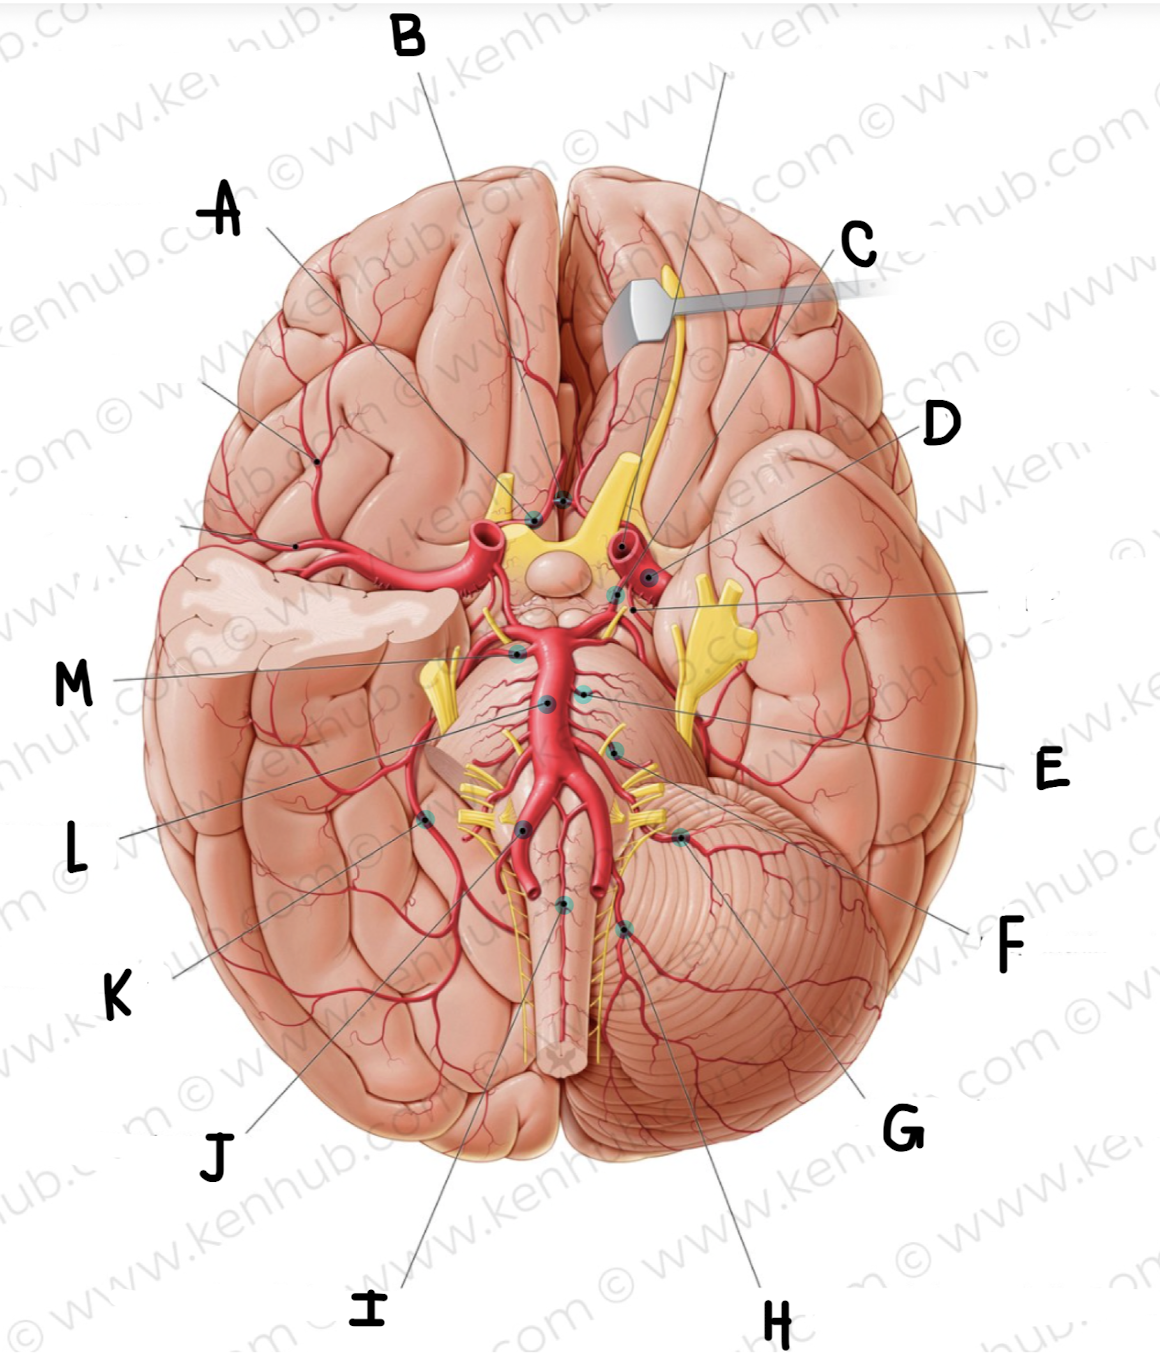 <p>What is the name of the artery labeled G?</p>